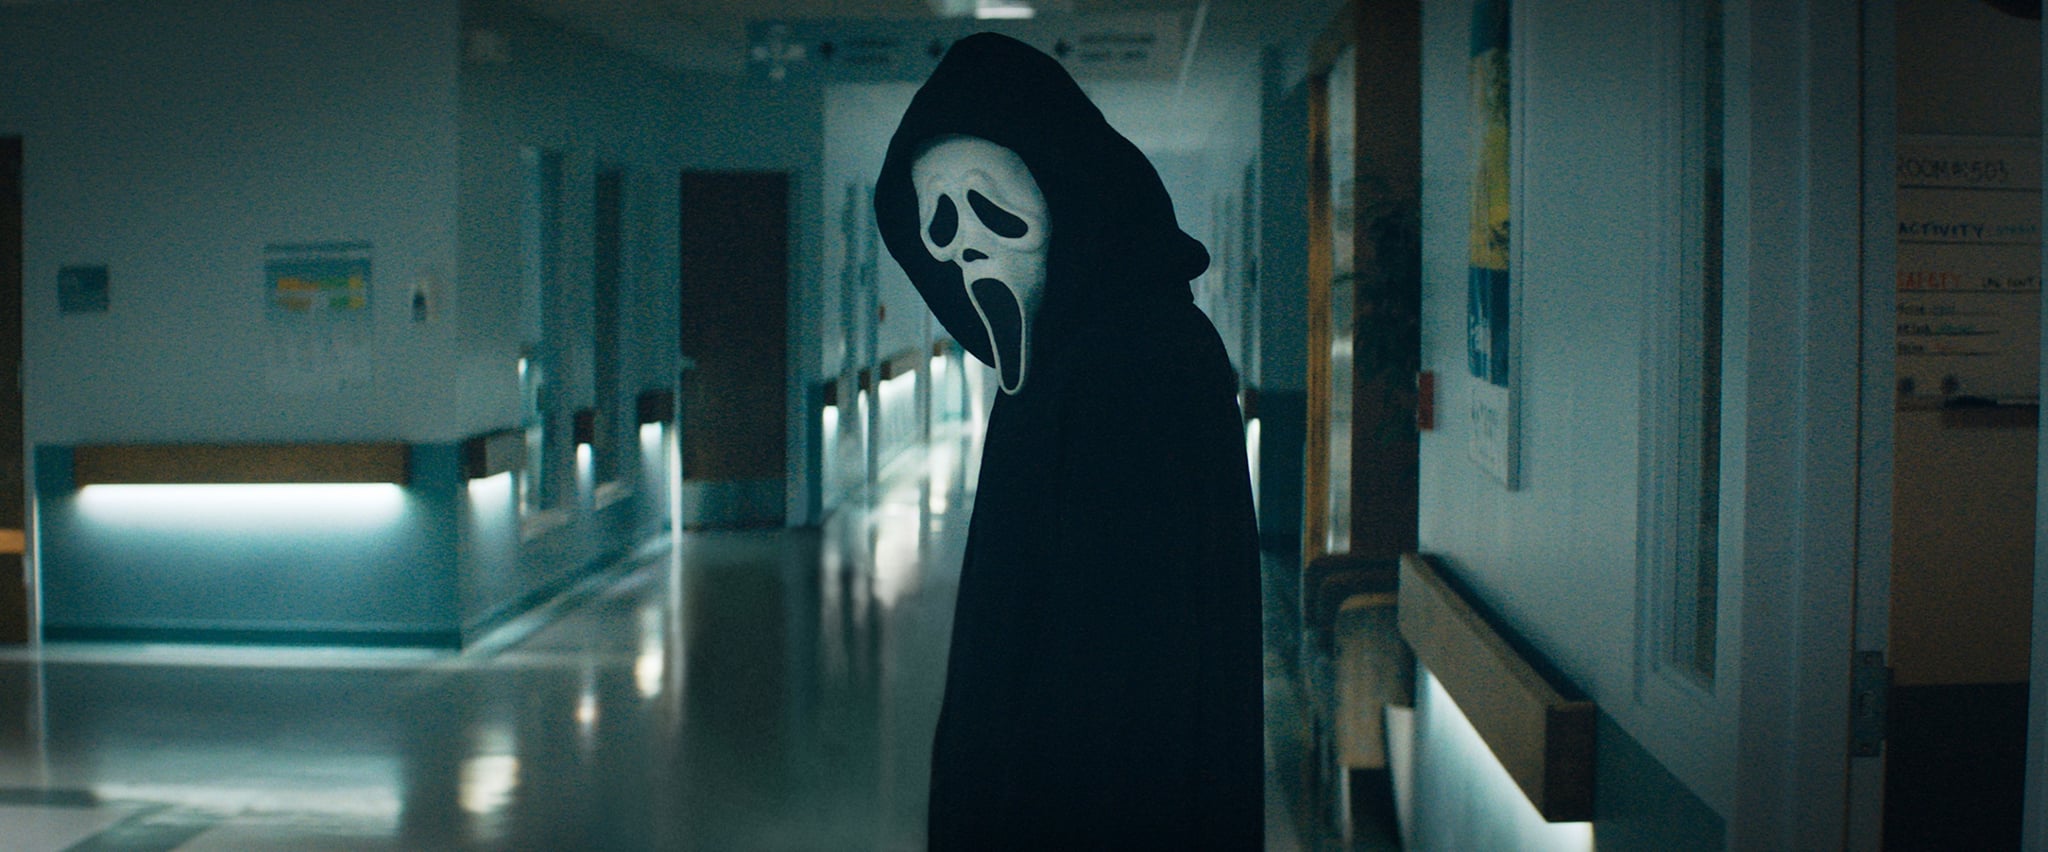 SCREAM, (aka SCREAM 5), Ghostface, 2022. © Paramount Pictures / Courtesy Everett Collection